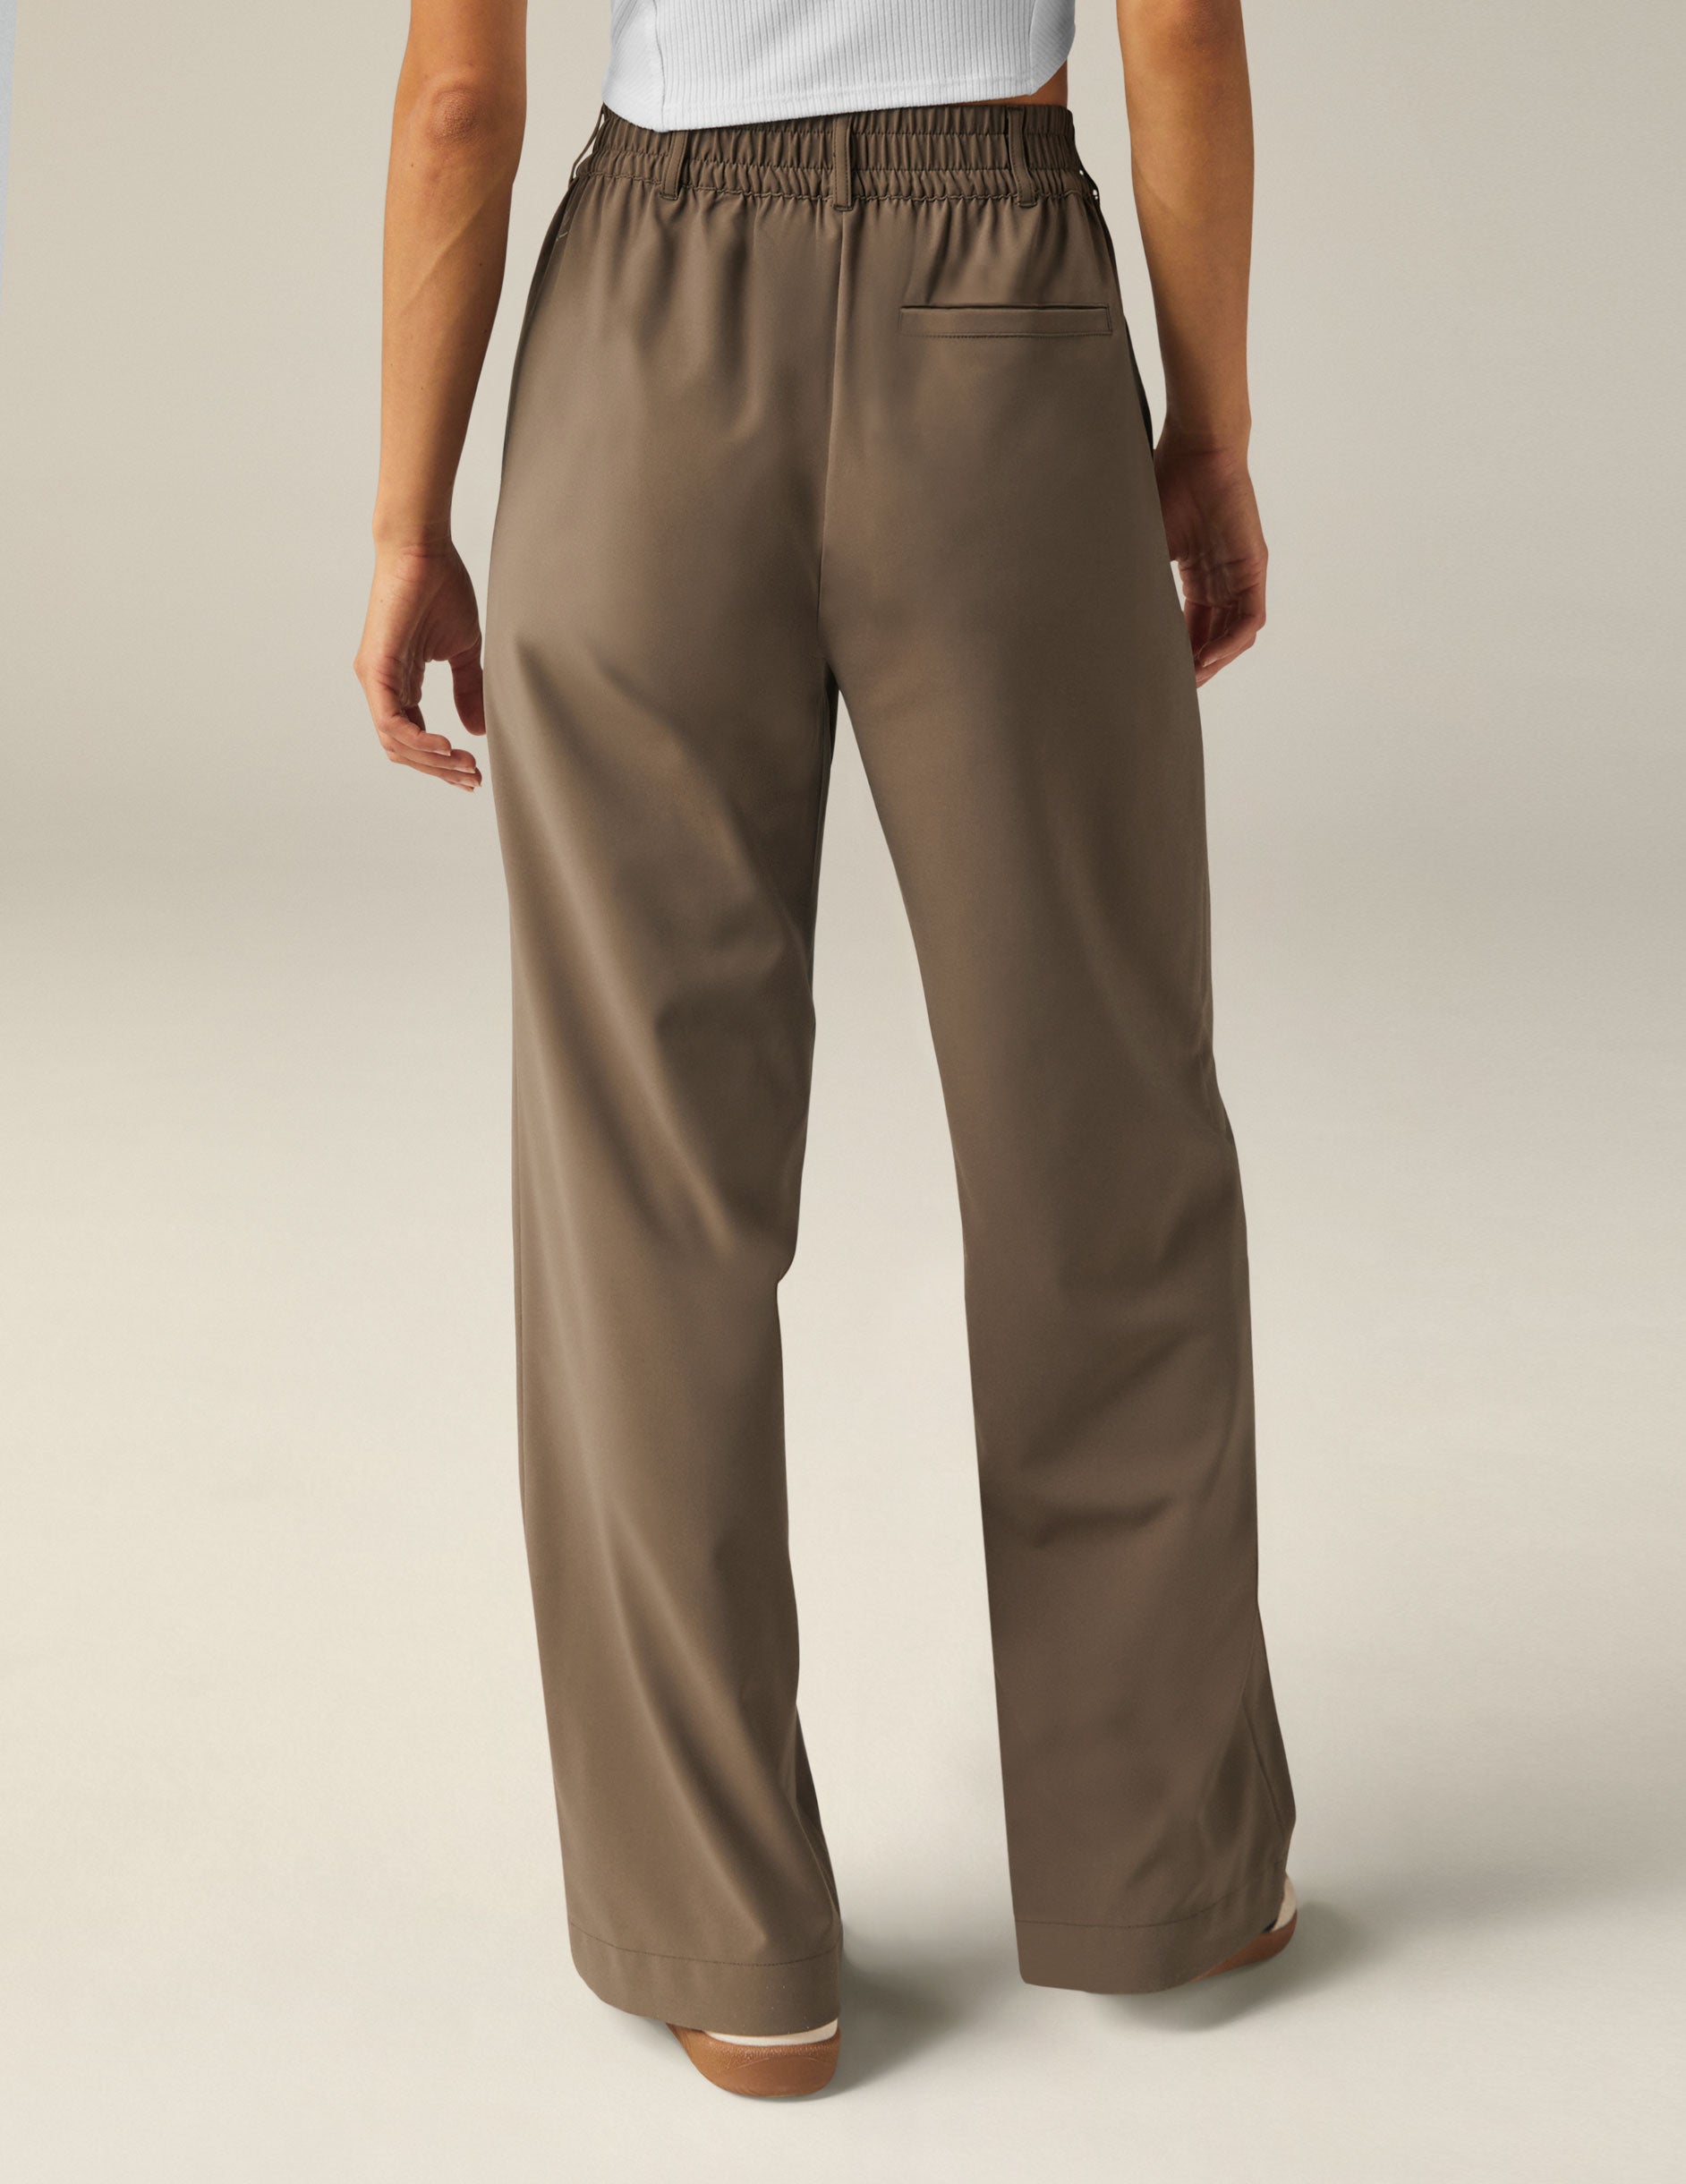 brown mid rise jetstretch woven pants with cargo style pockets. 